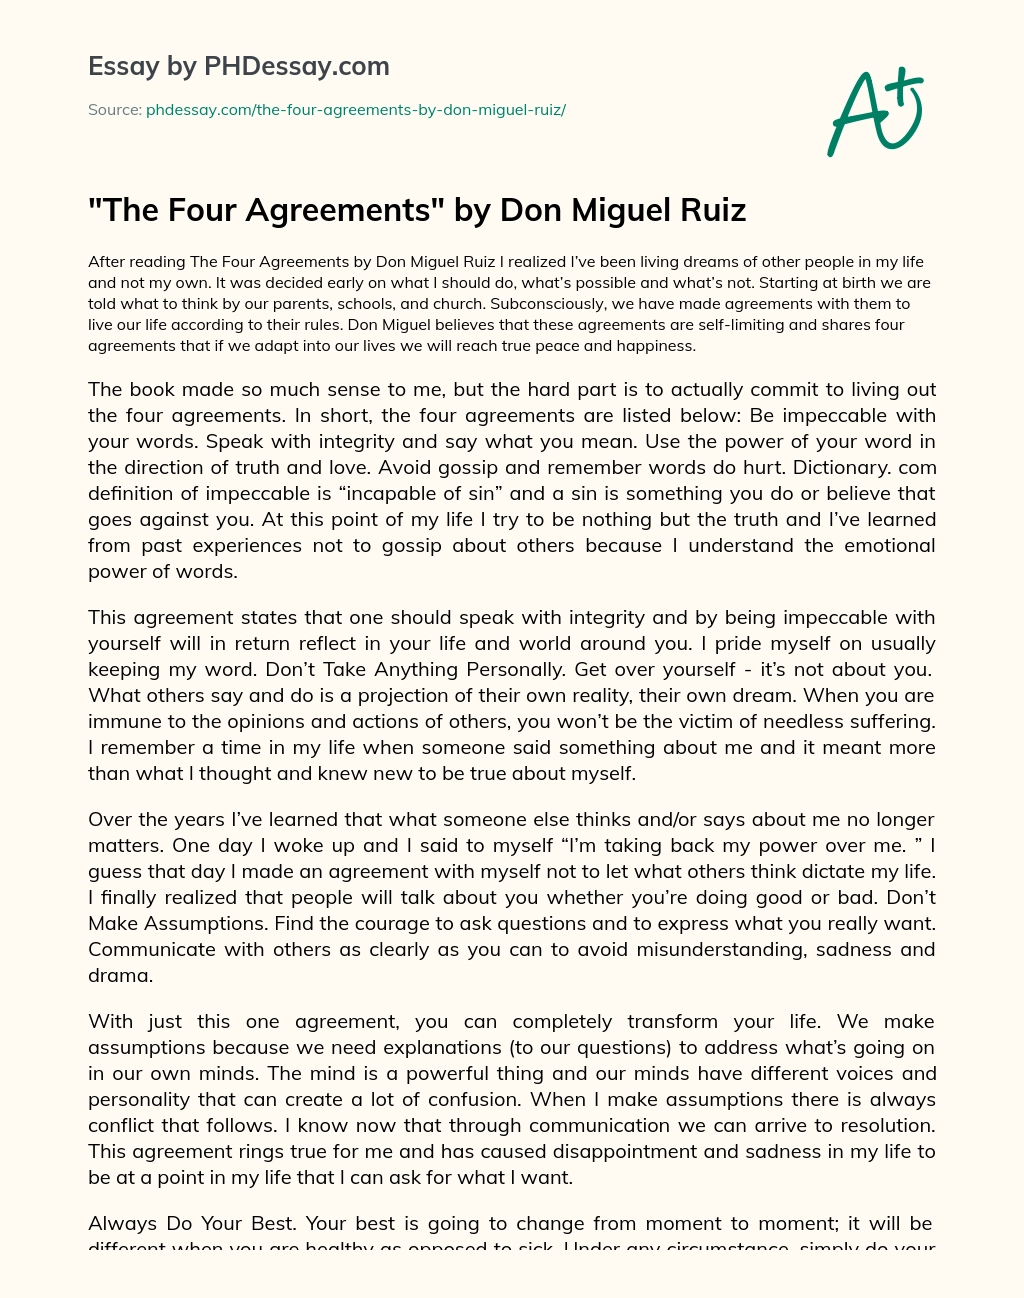 The Four Agreements by Don Miguel Ruiz essay